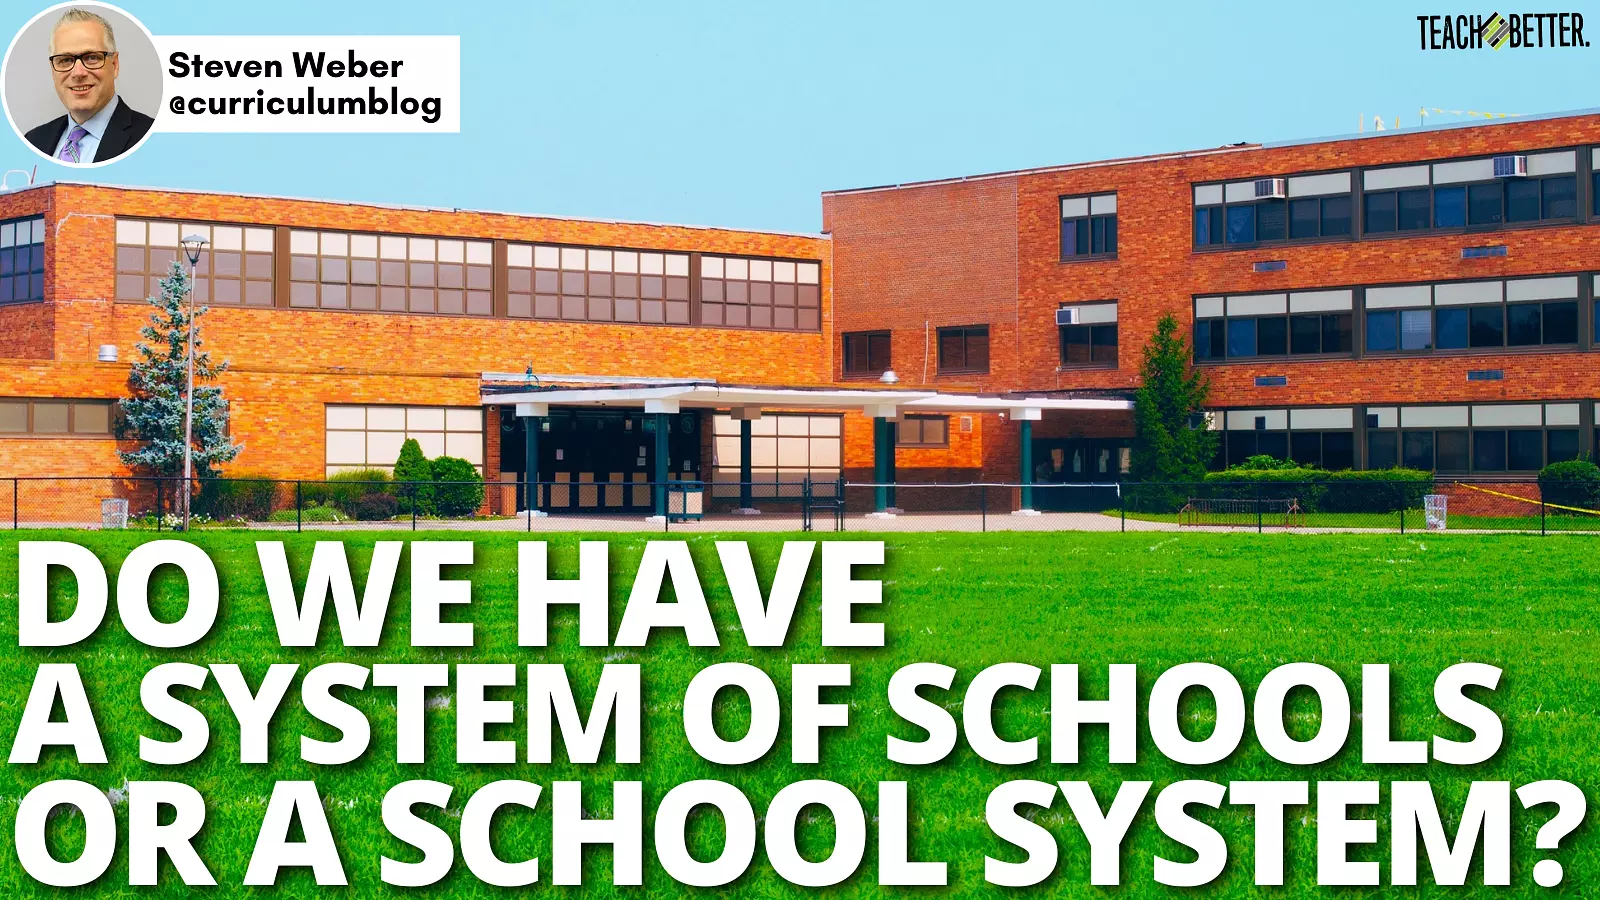 Do We Have A System Of Schools Or A School System? - Teach Better